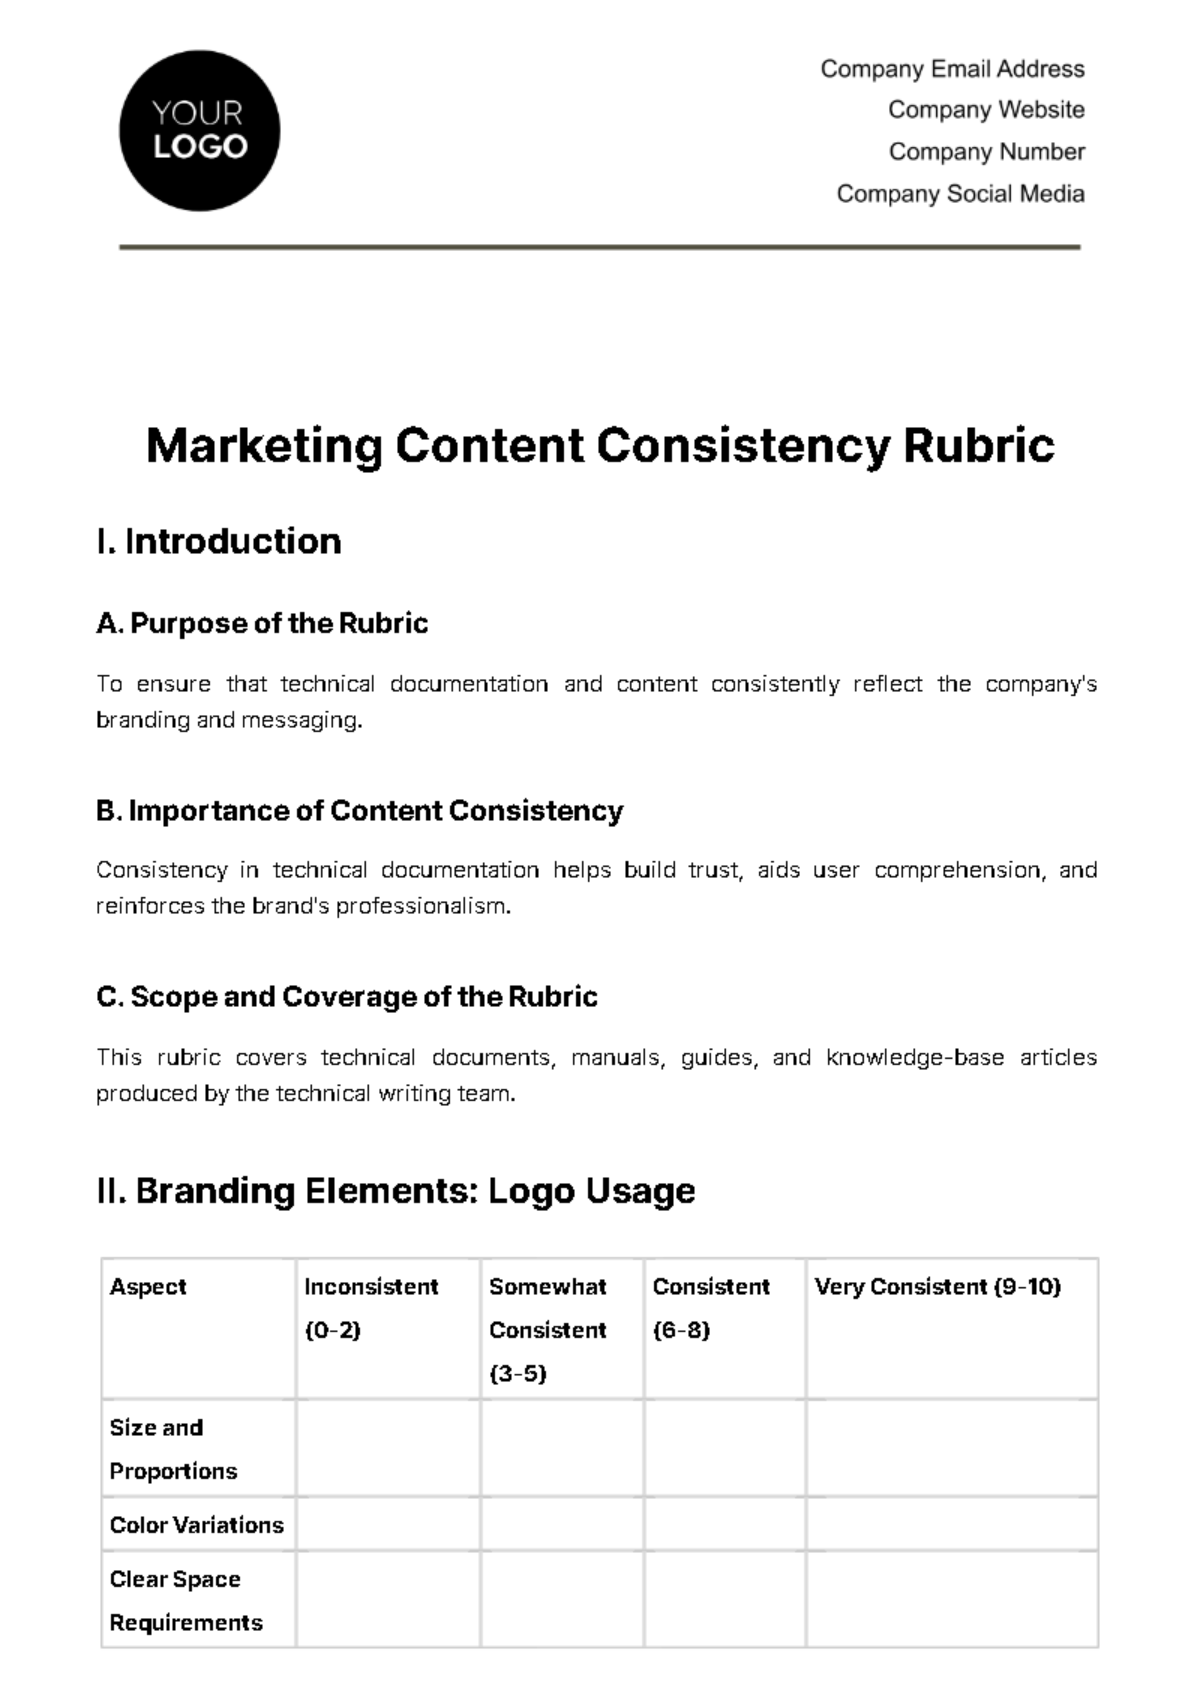 Free Marketing Content Consistency Rubric Template